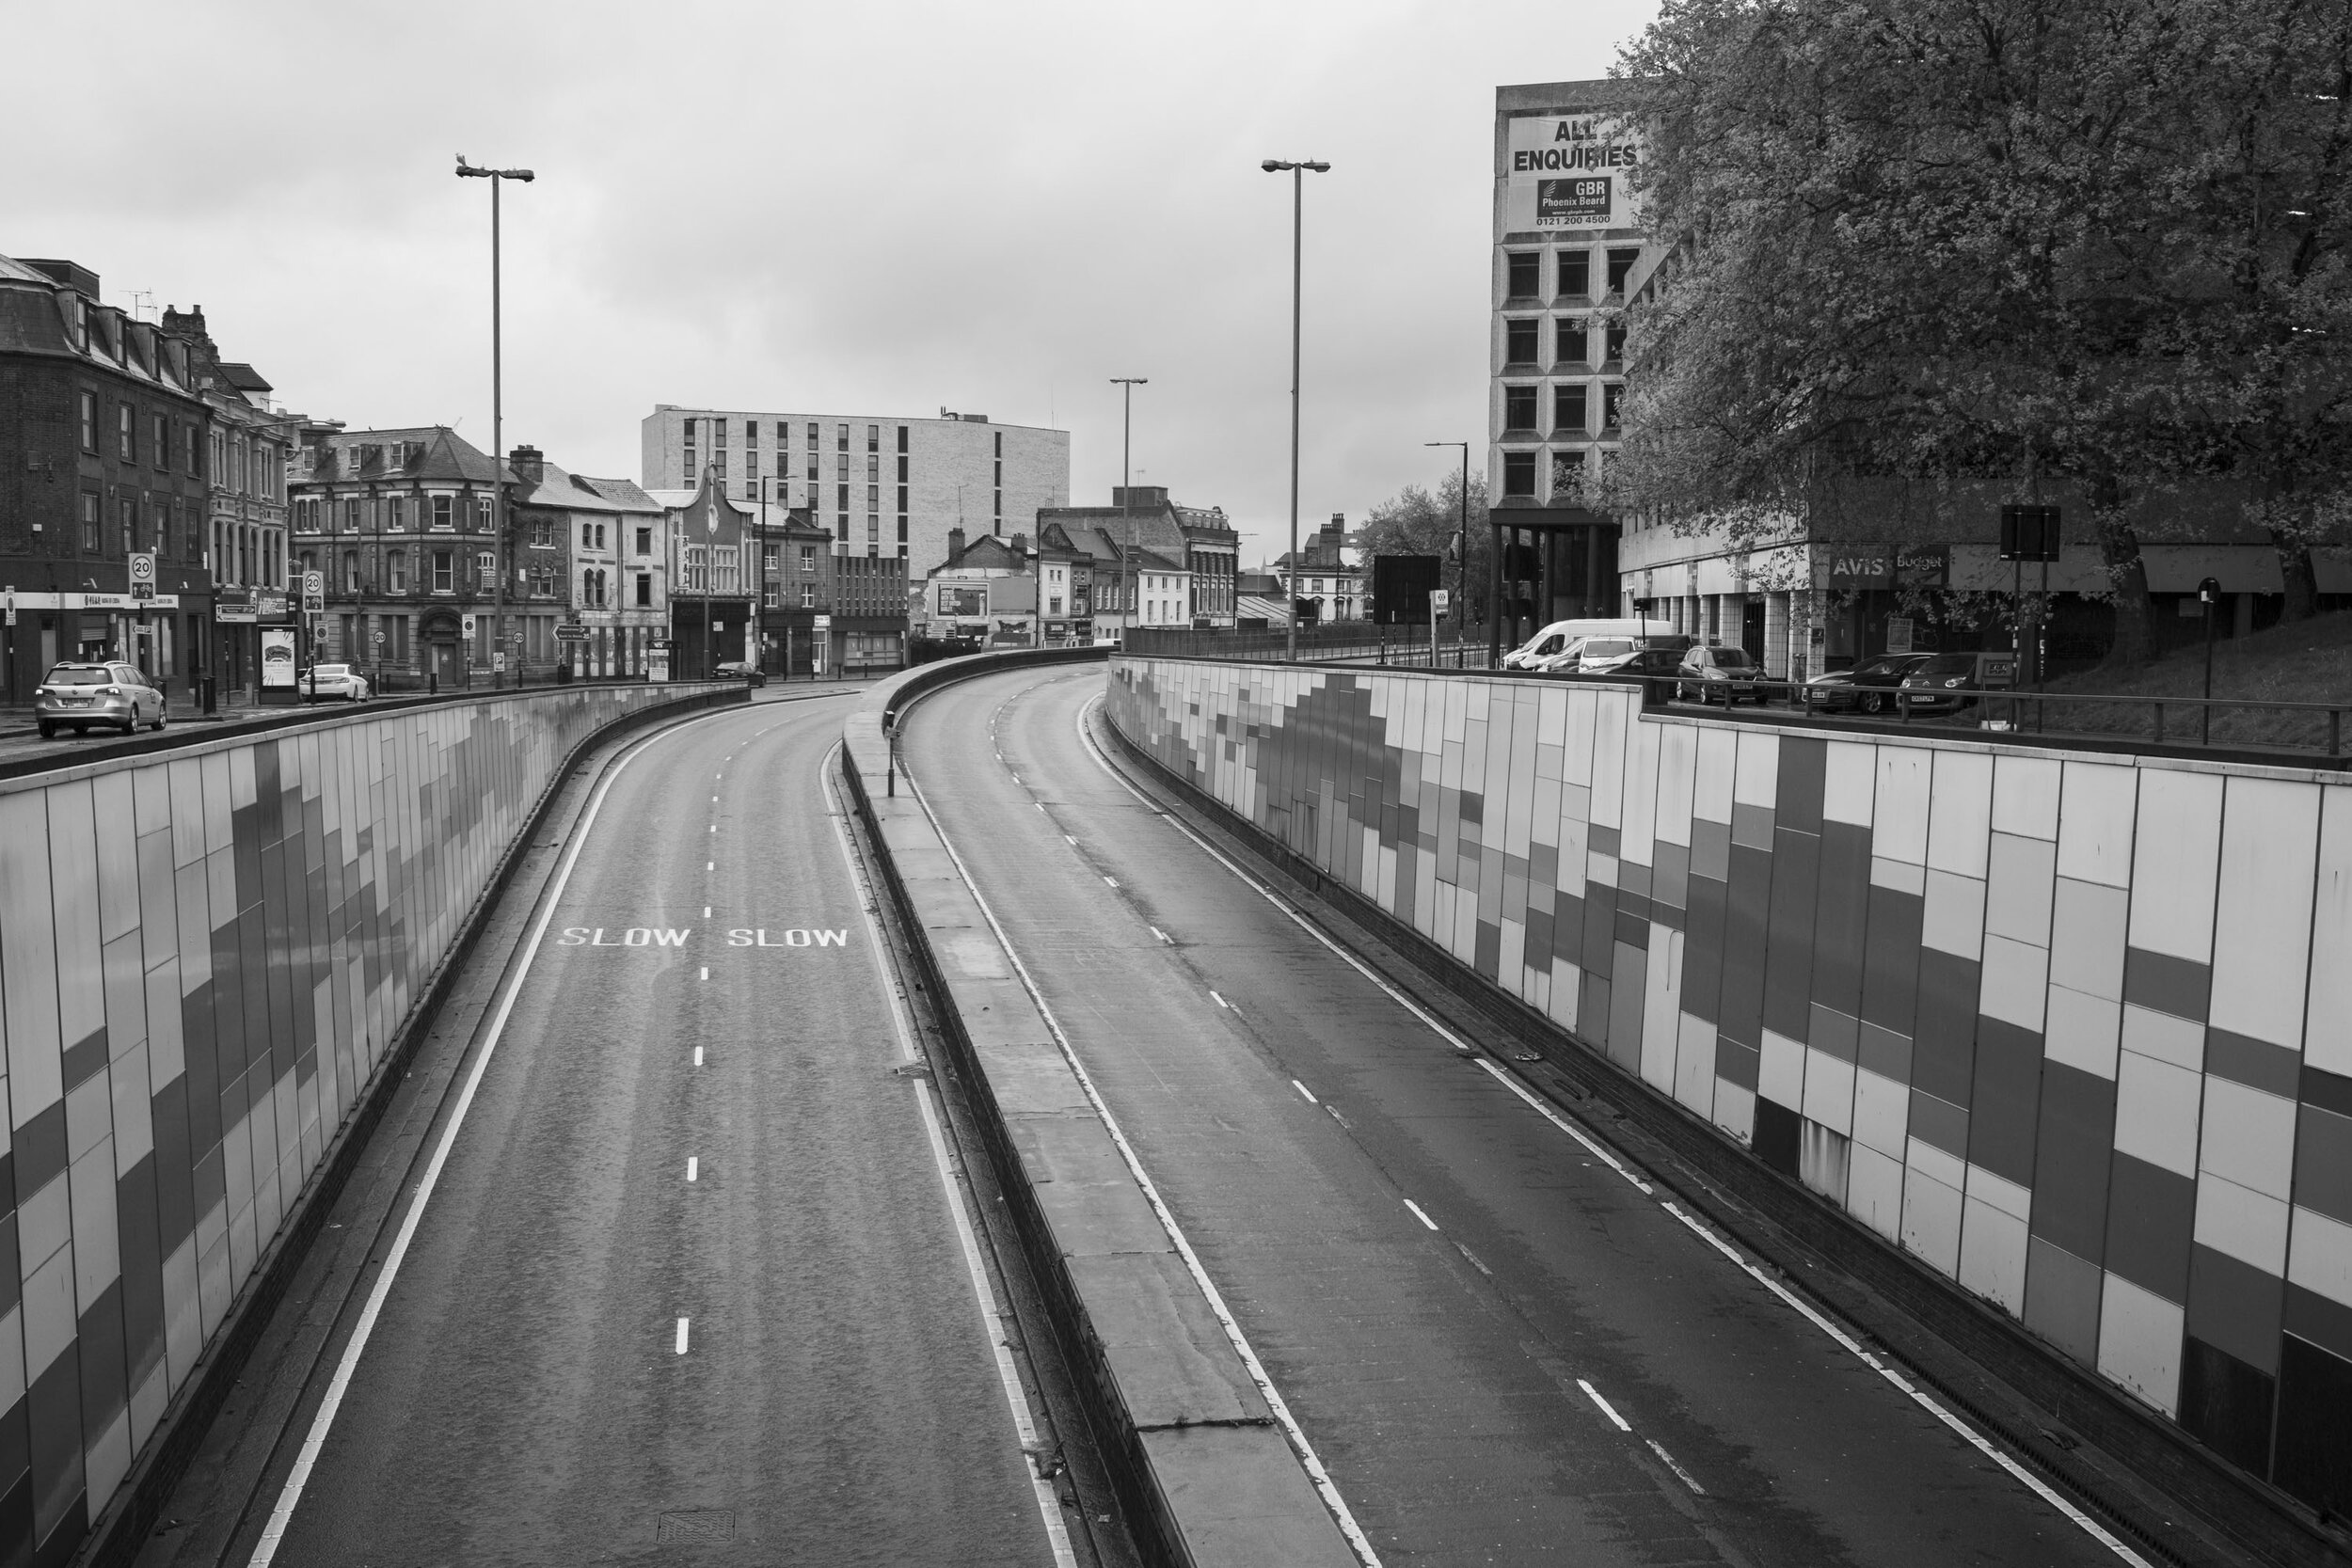  Bristol Street, the A38 and one of the busiest main roads through the City. April 2020. Chinese Quarter. 